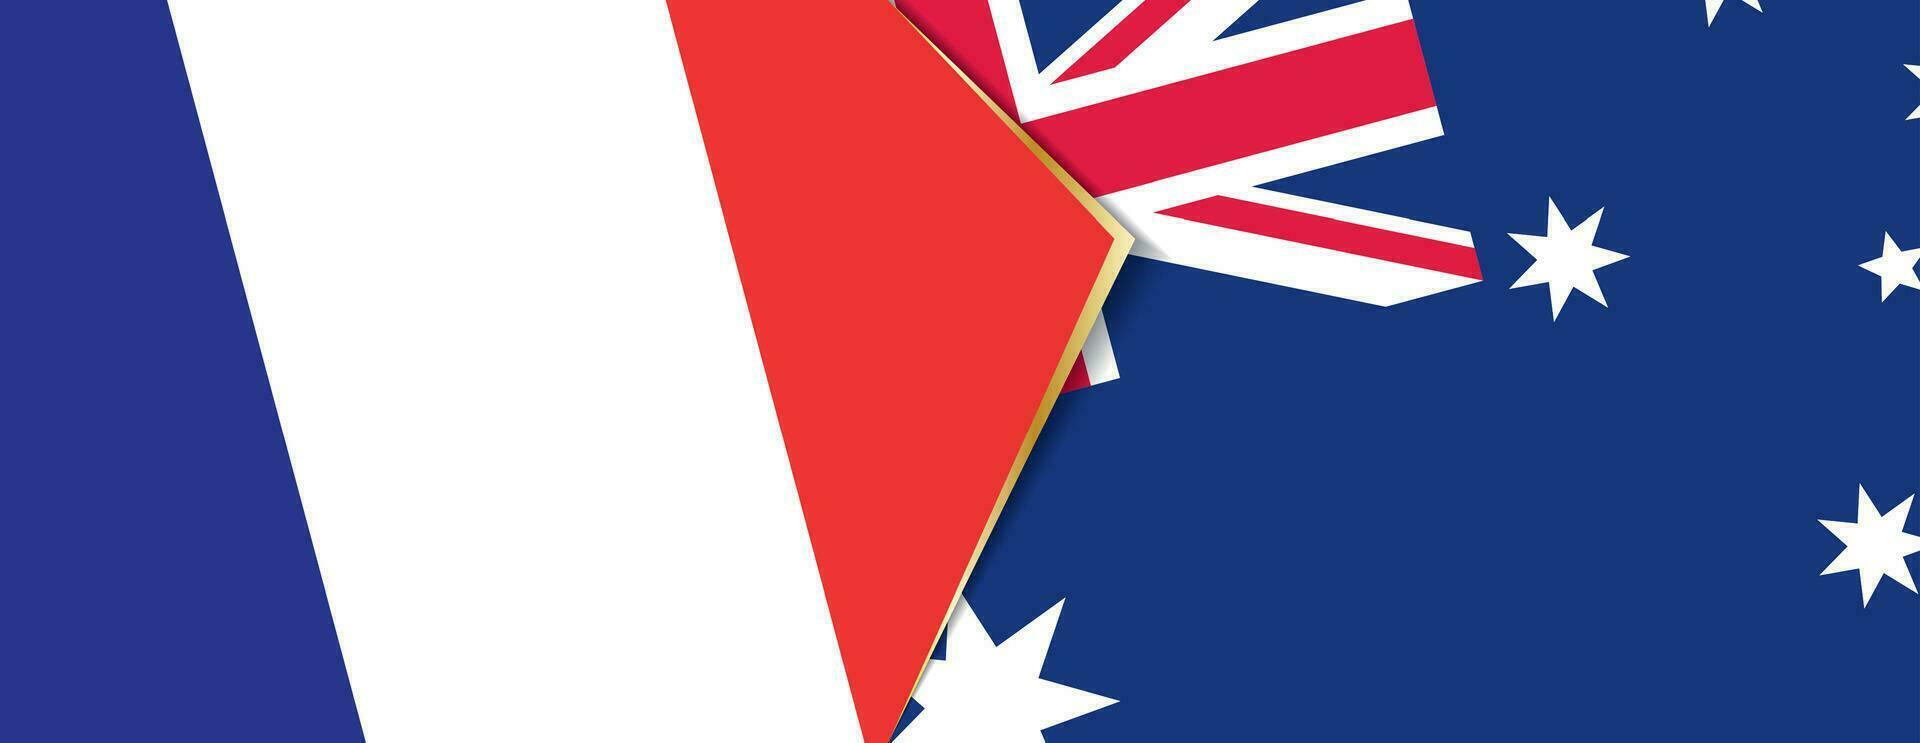 France and Australia flags, two vector flags.